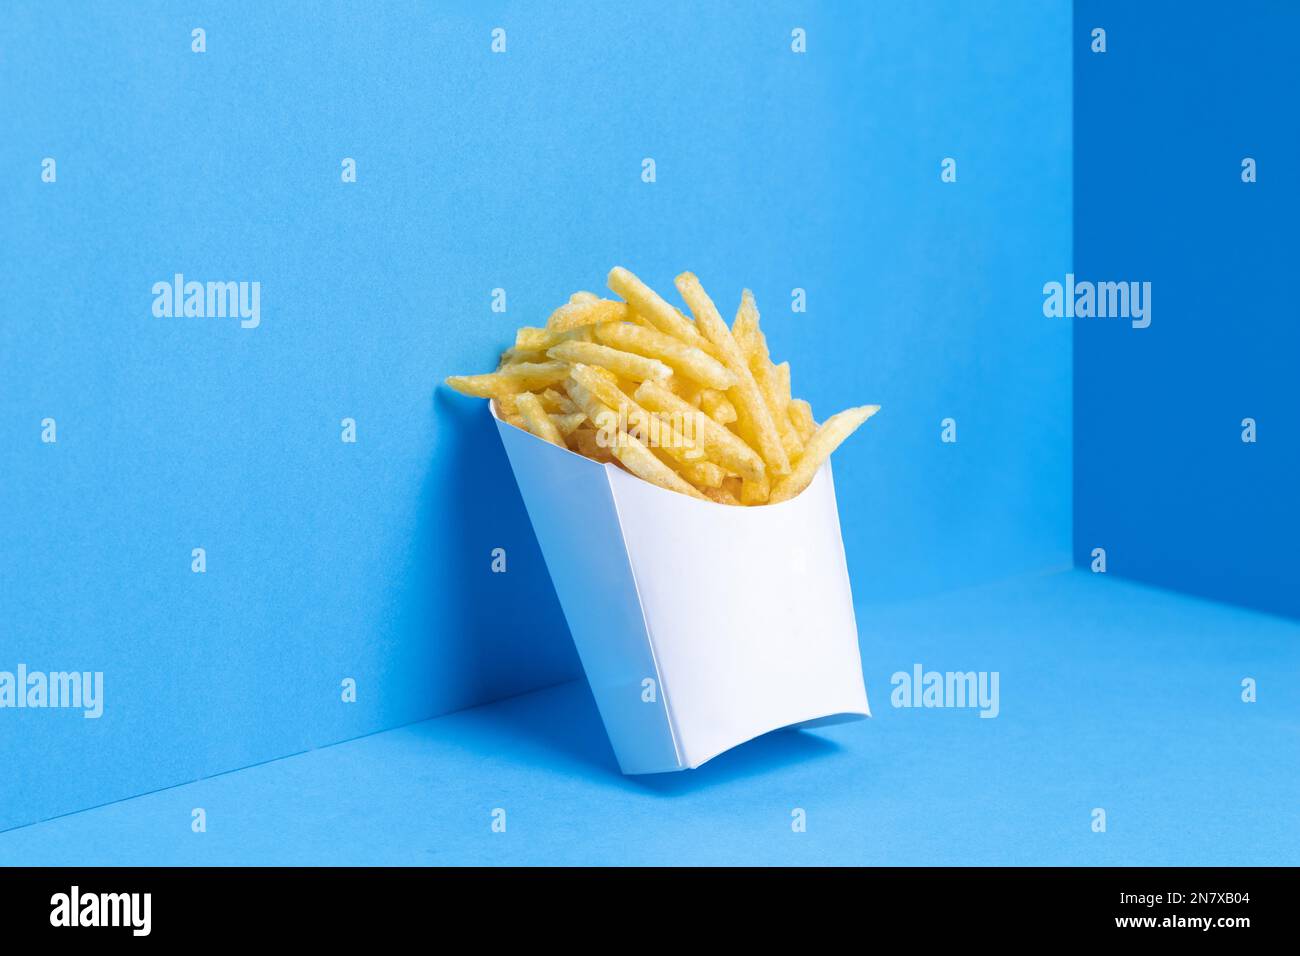 French fries in paper snack bag - Photo #5992 - motosha